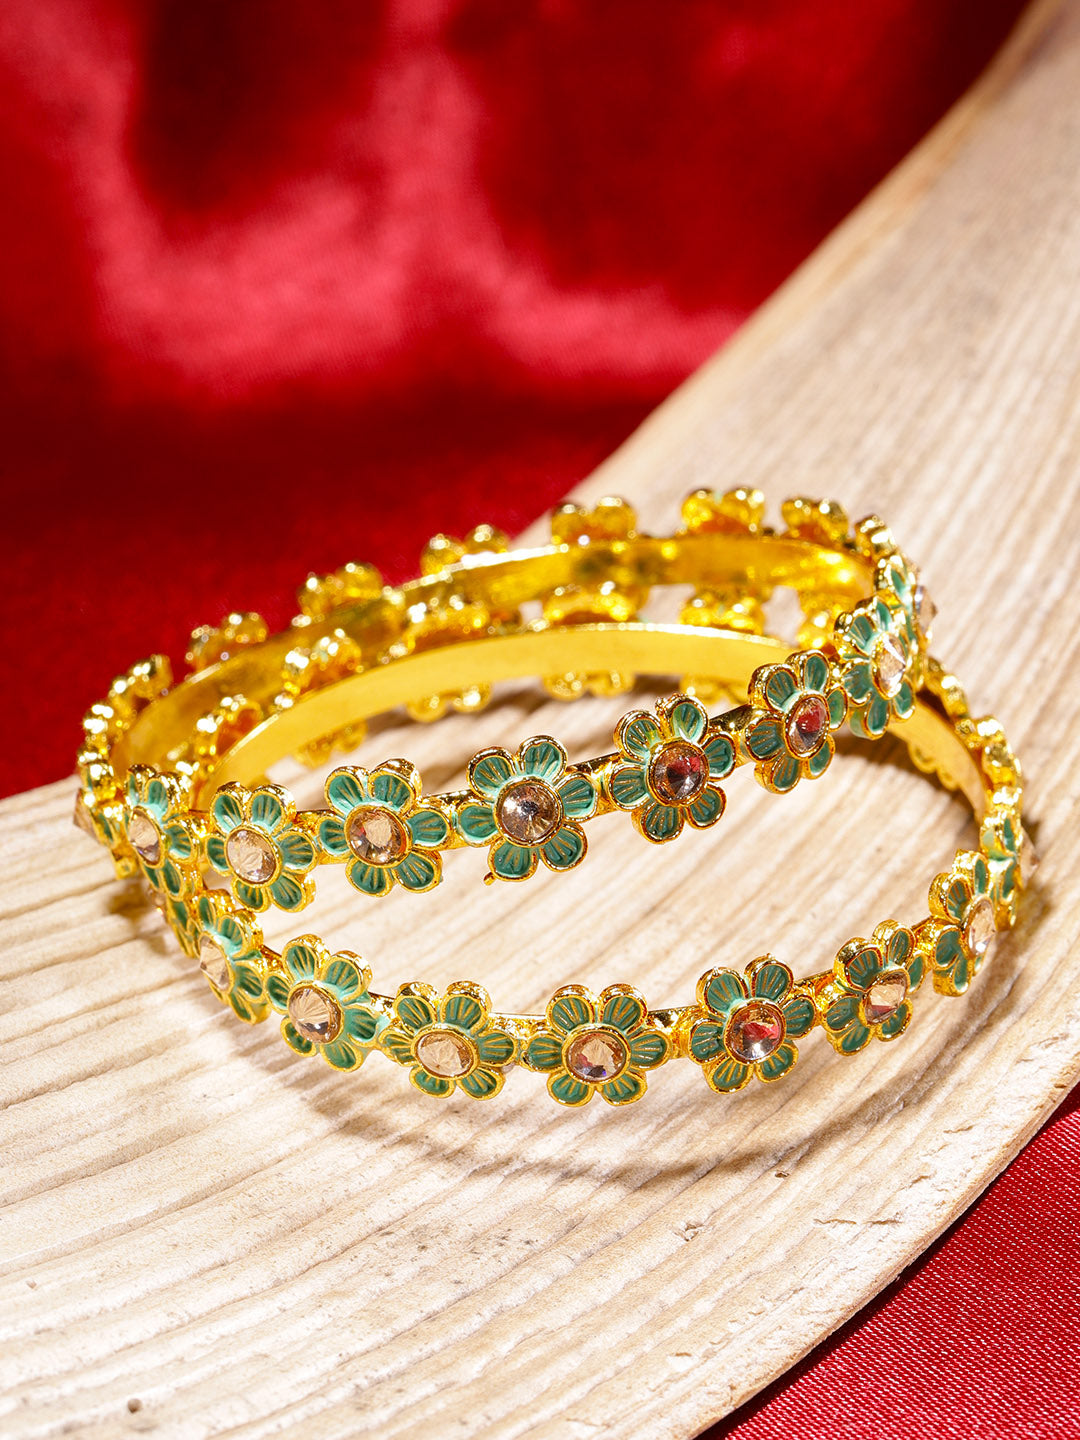 Set of 2 Gold-Plated Stones Studded, Green Meenakari Bangles in Floral Pattern